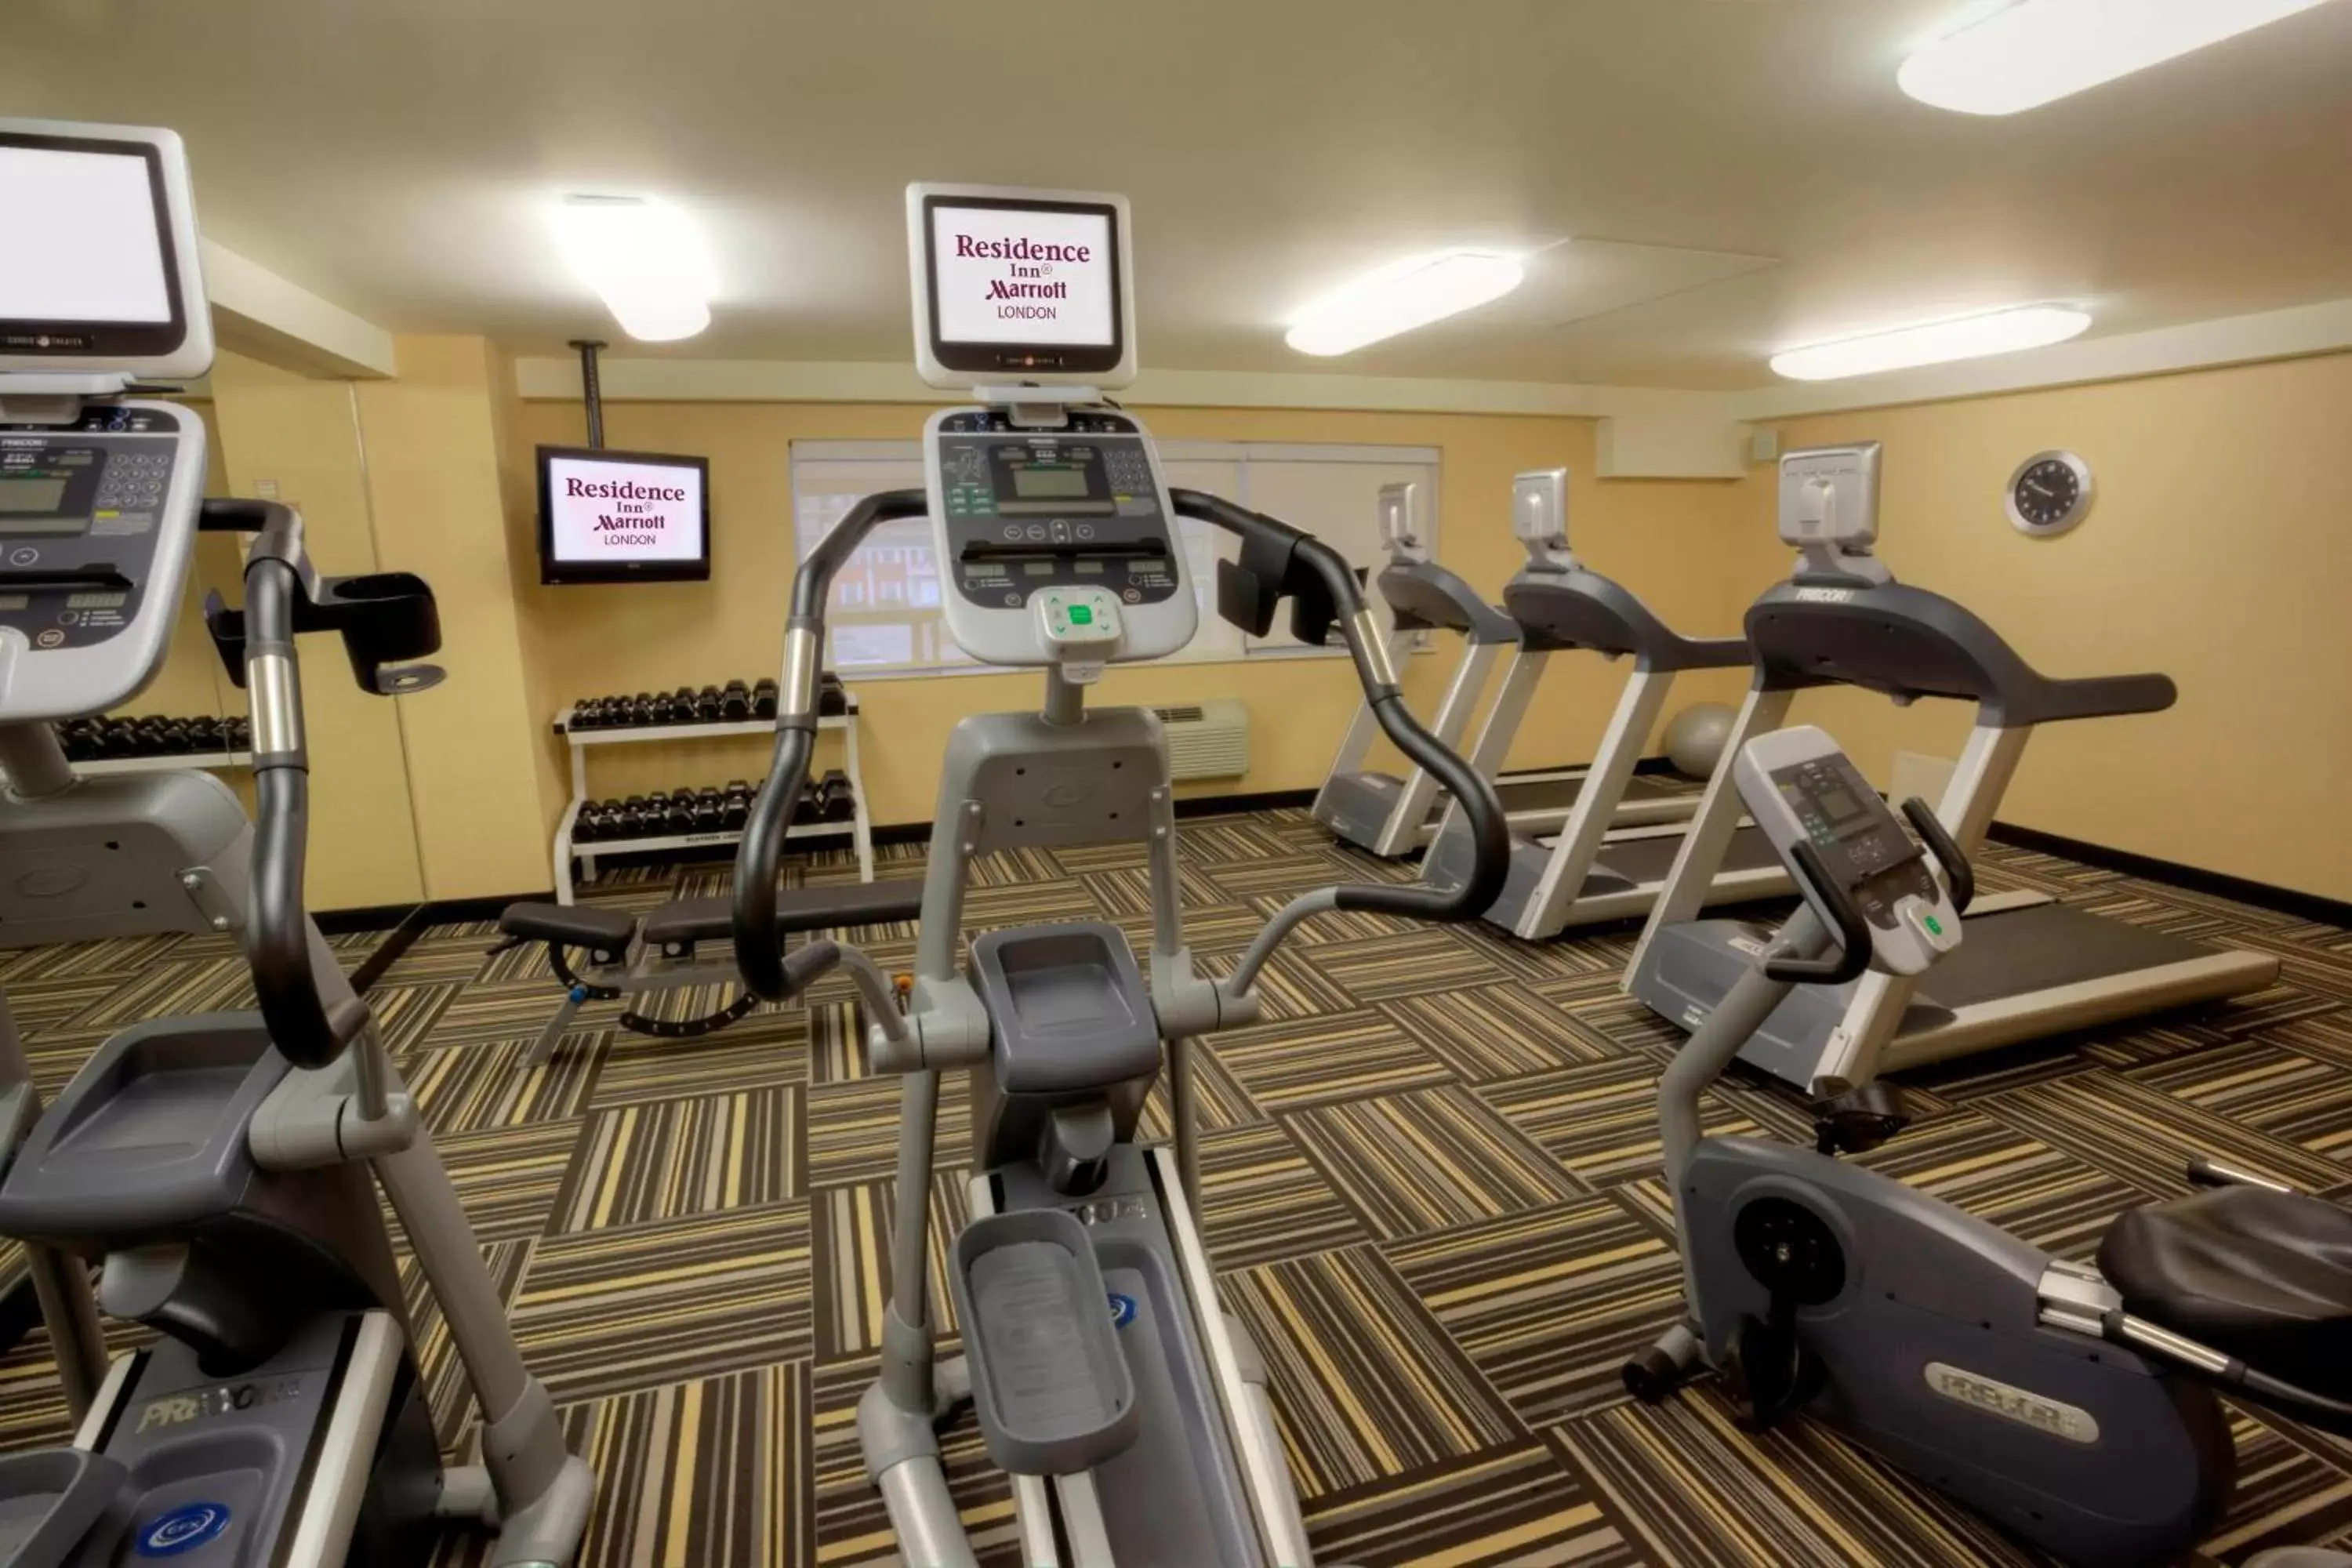 Fitness centre/facilities, Fitness Center/Facilities in Residence Inn by Marriott London Downtown